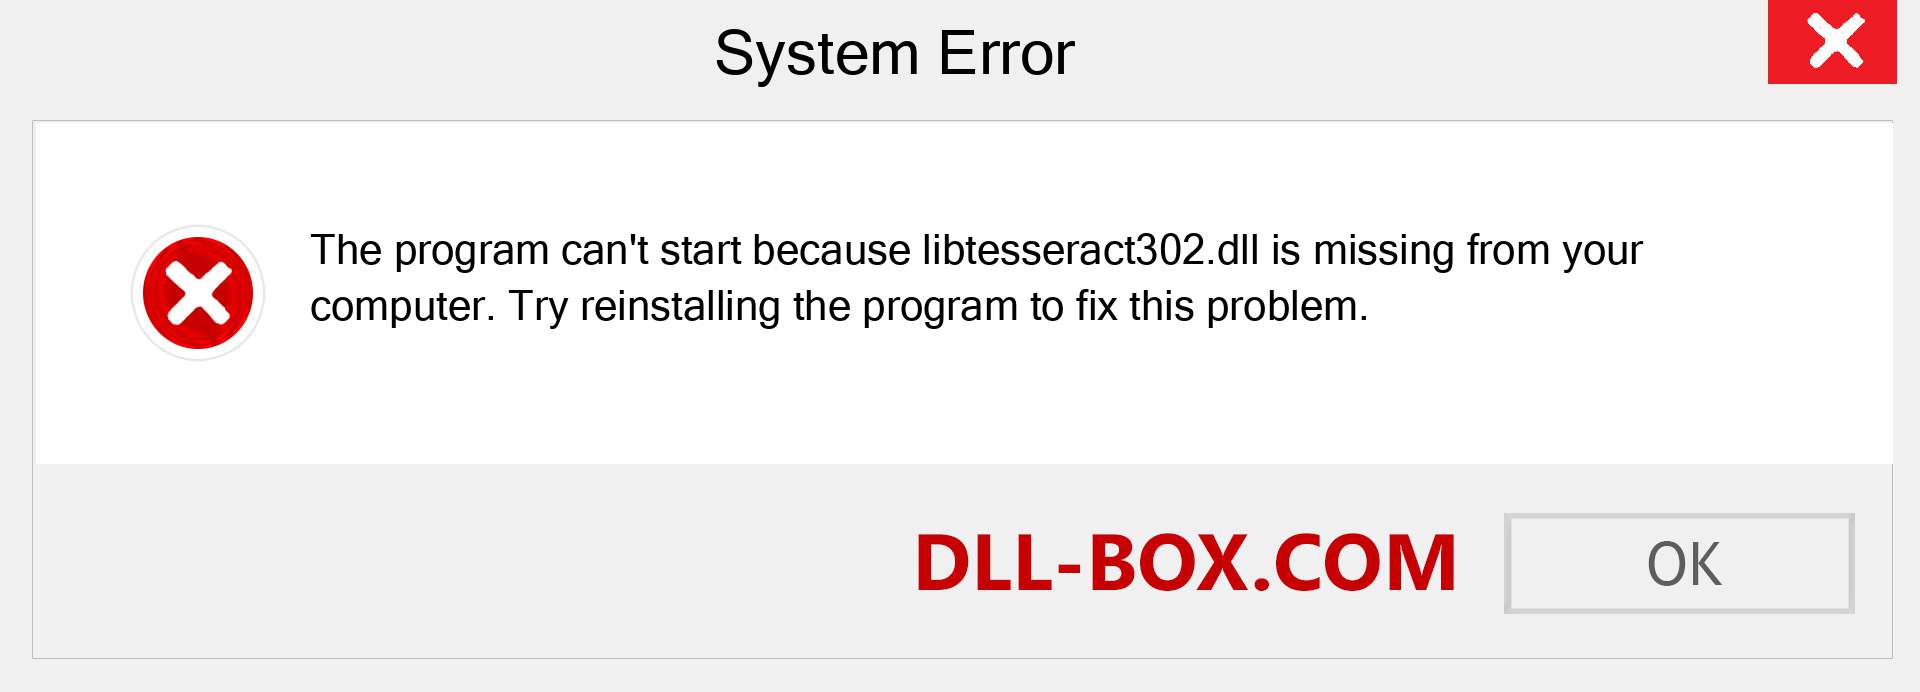  libtesseract302.dll file is missing?. Download for Windows 7, 8, 10 - Fix  libtesseract302 dll Missing Error on Windows, photos, images